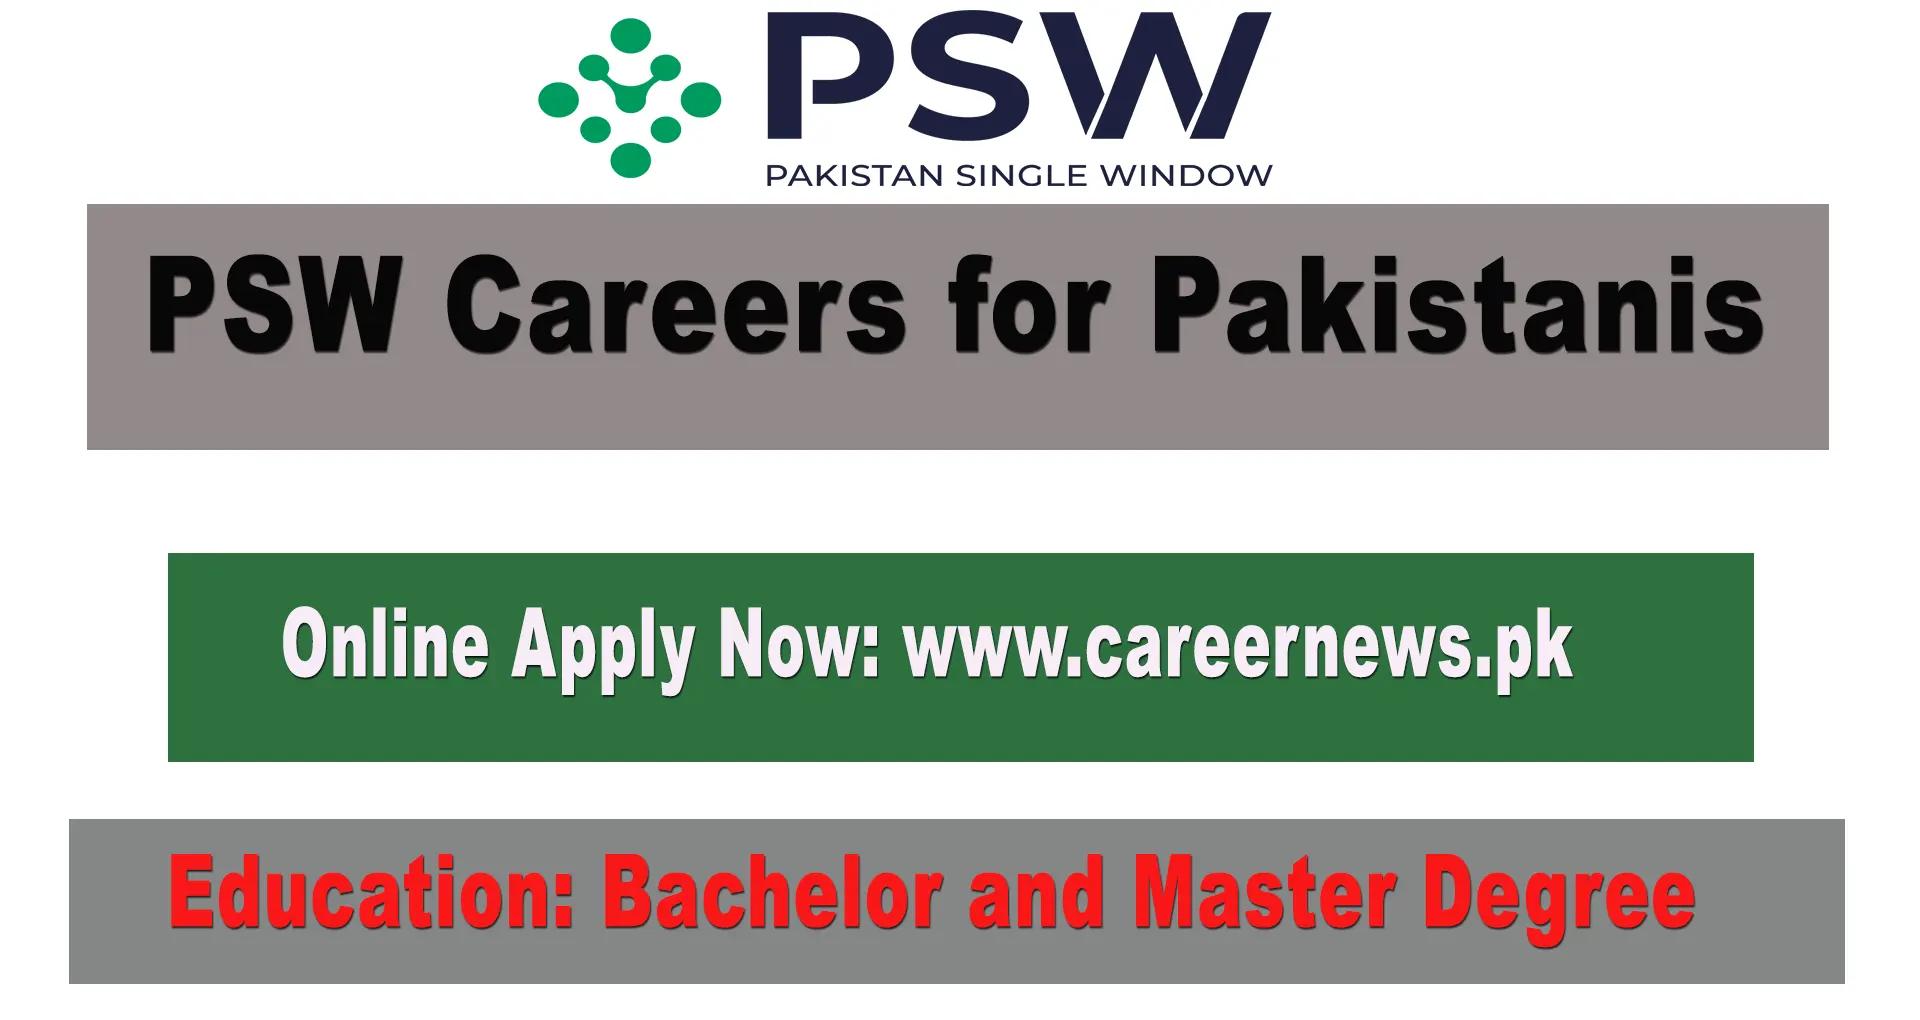 PSW Careers Online Apply at www.careernews.pk